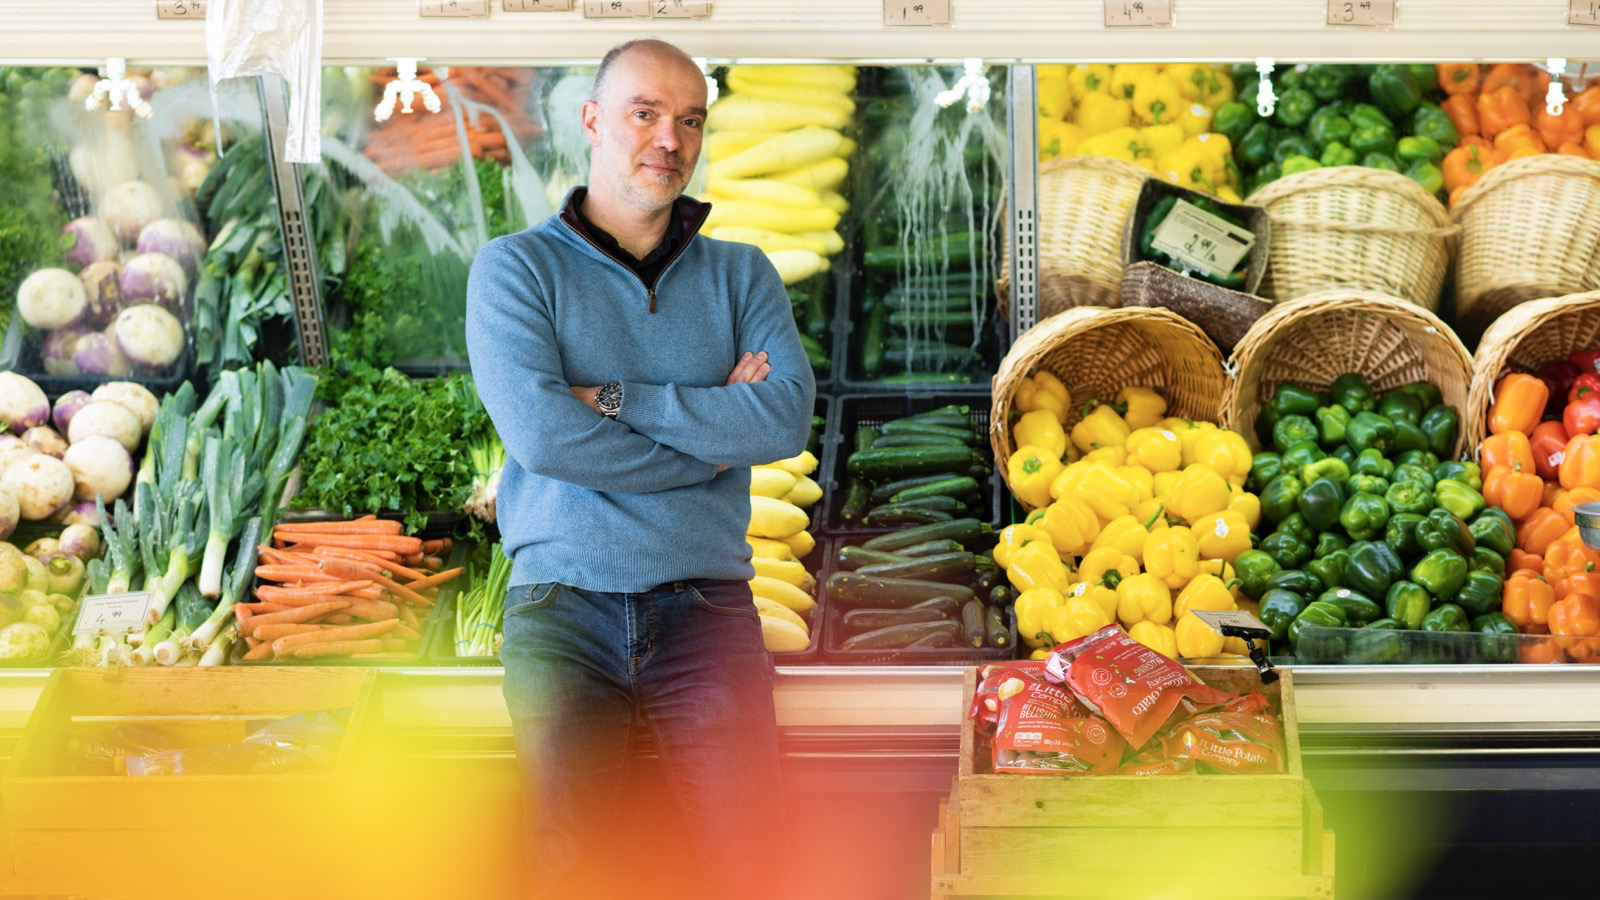 Man standing at a produce counter with vegatables behind him.